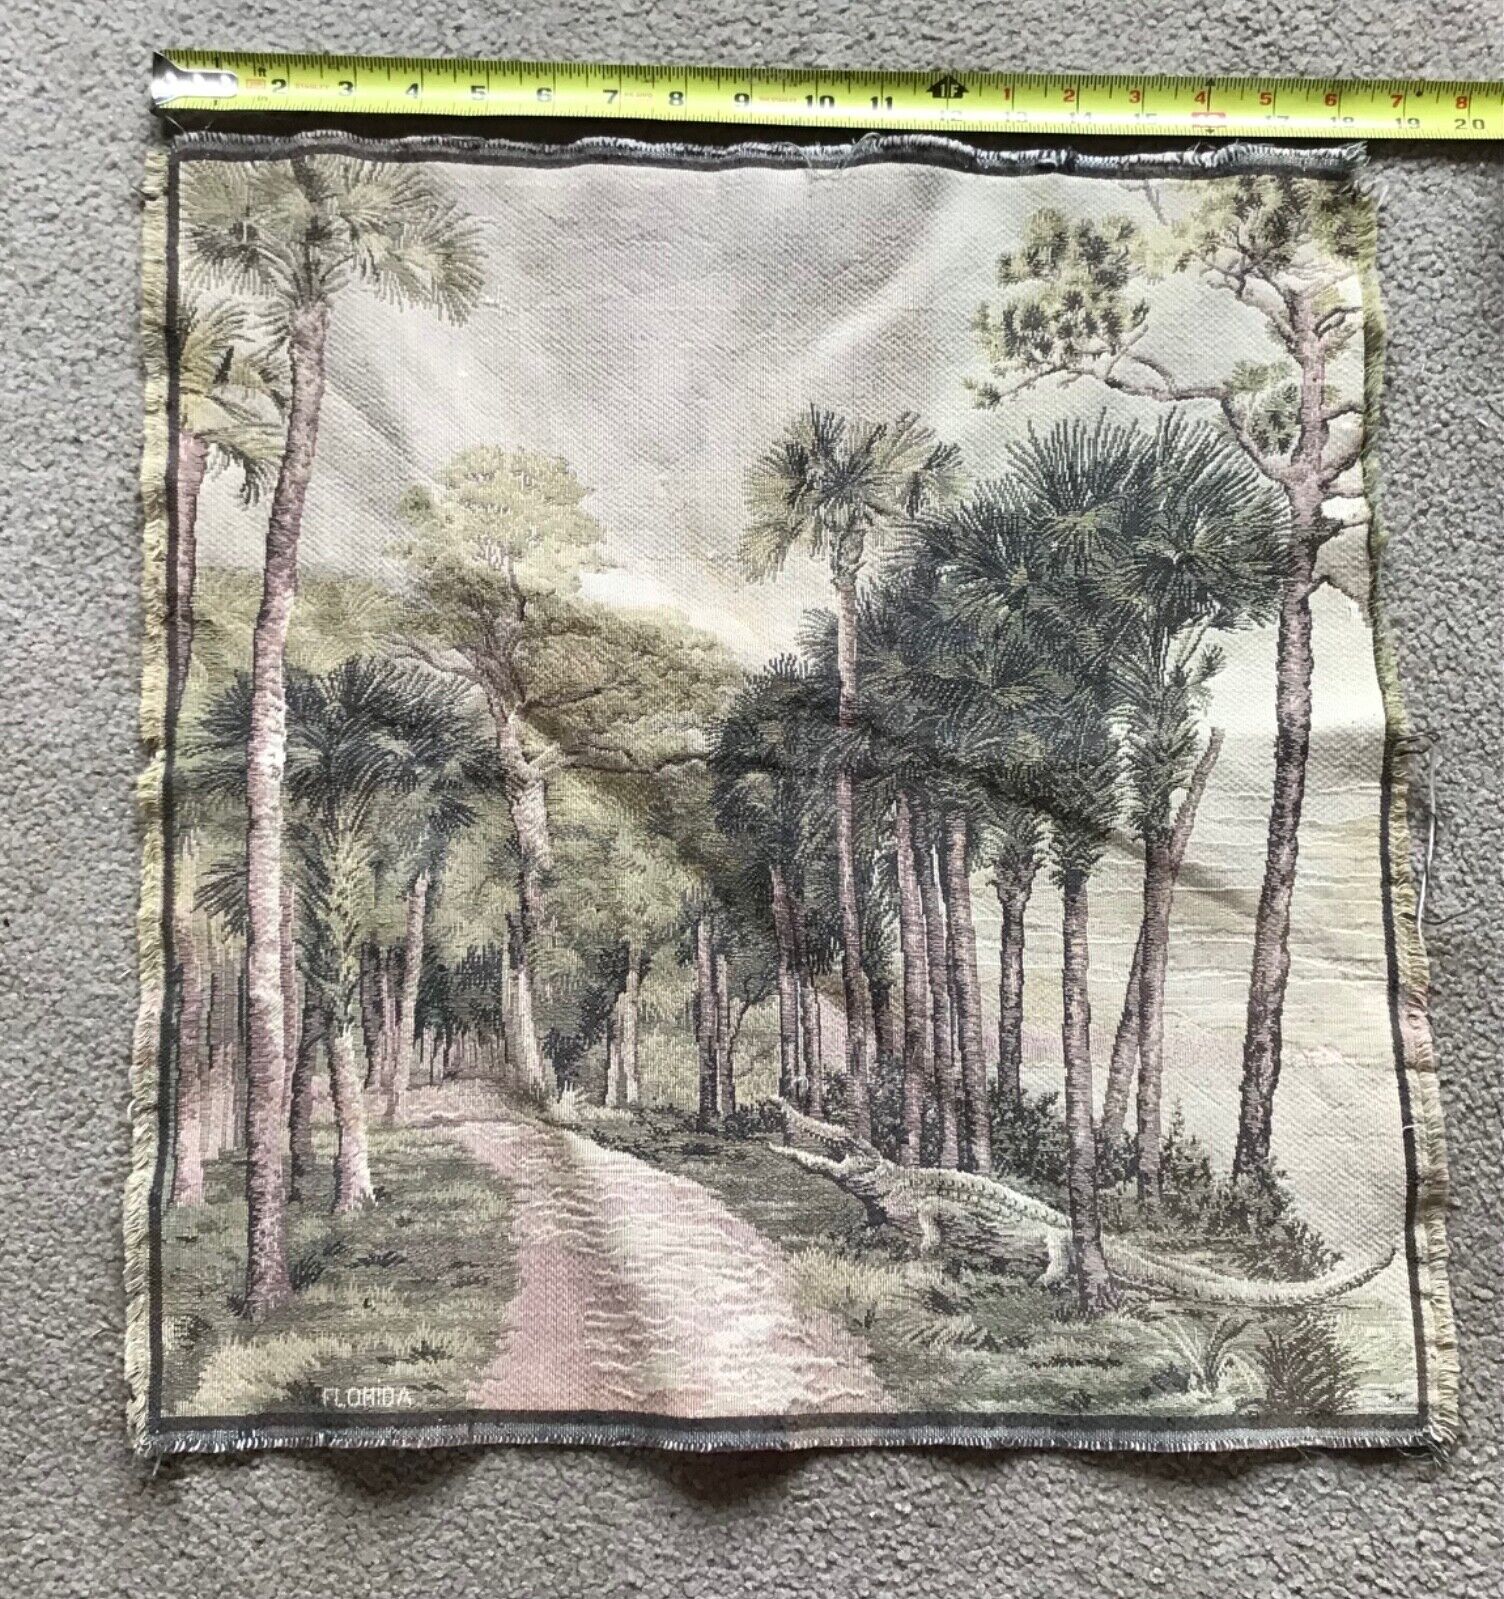 Vintage Florida FL. Tapestry With Alligator Crocodile Palm Trees Small-18” x 19”